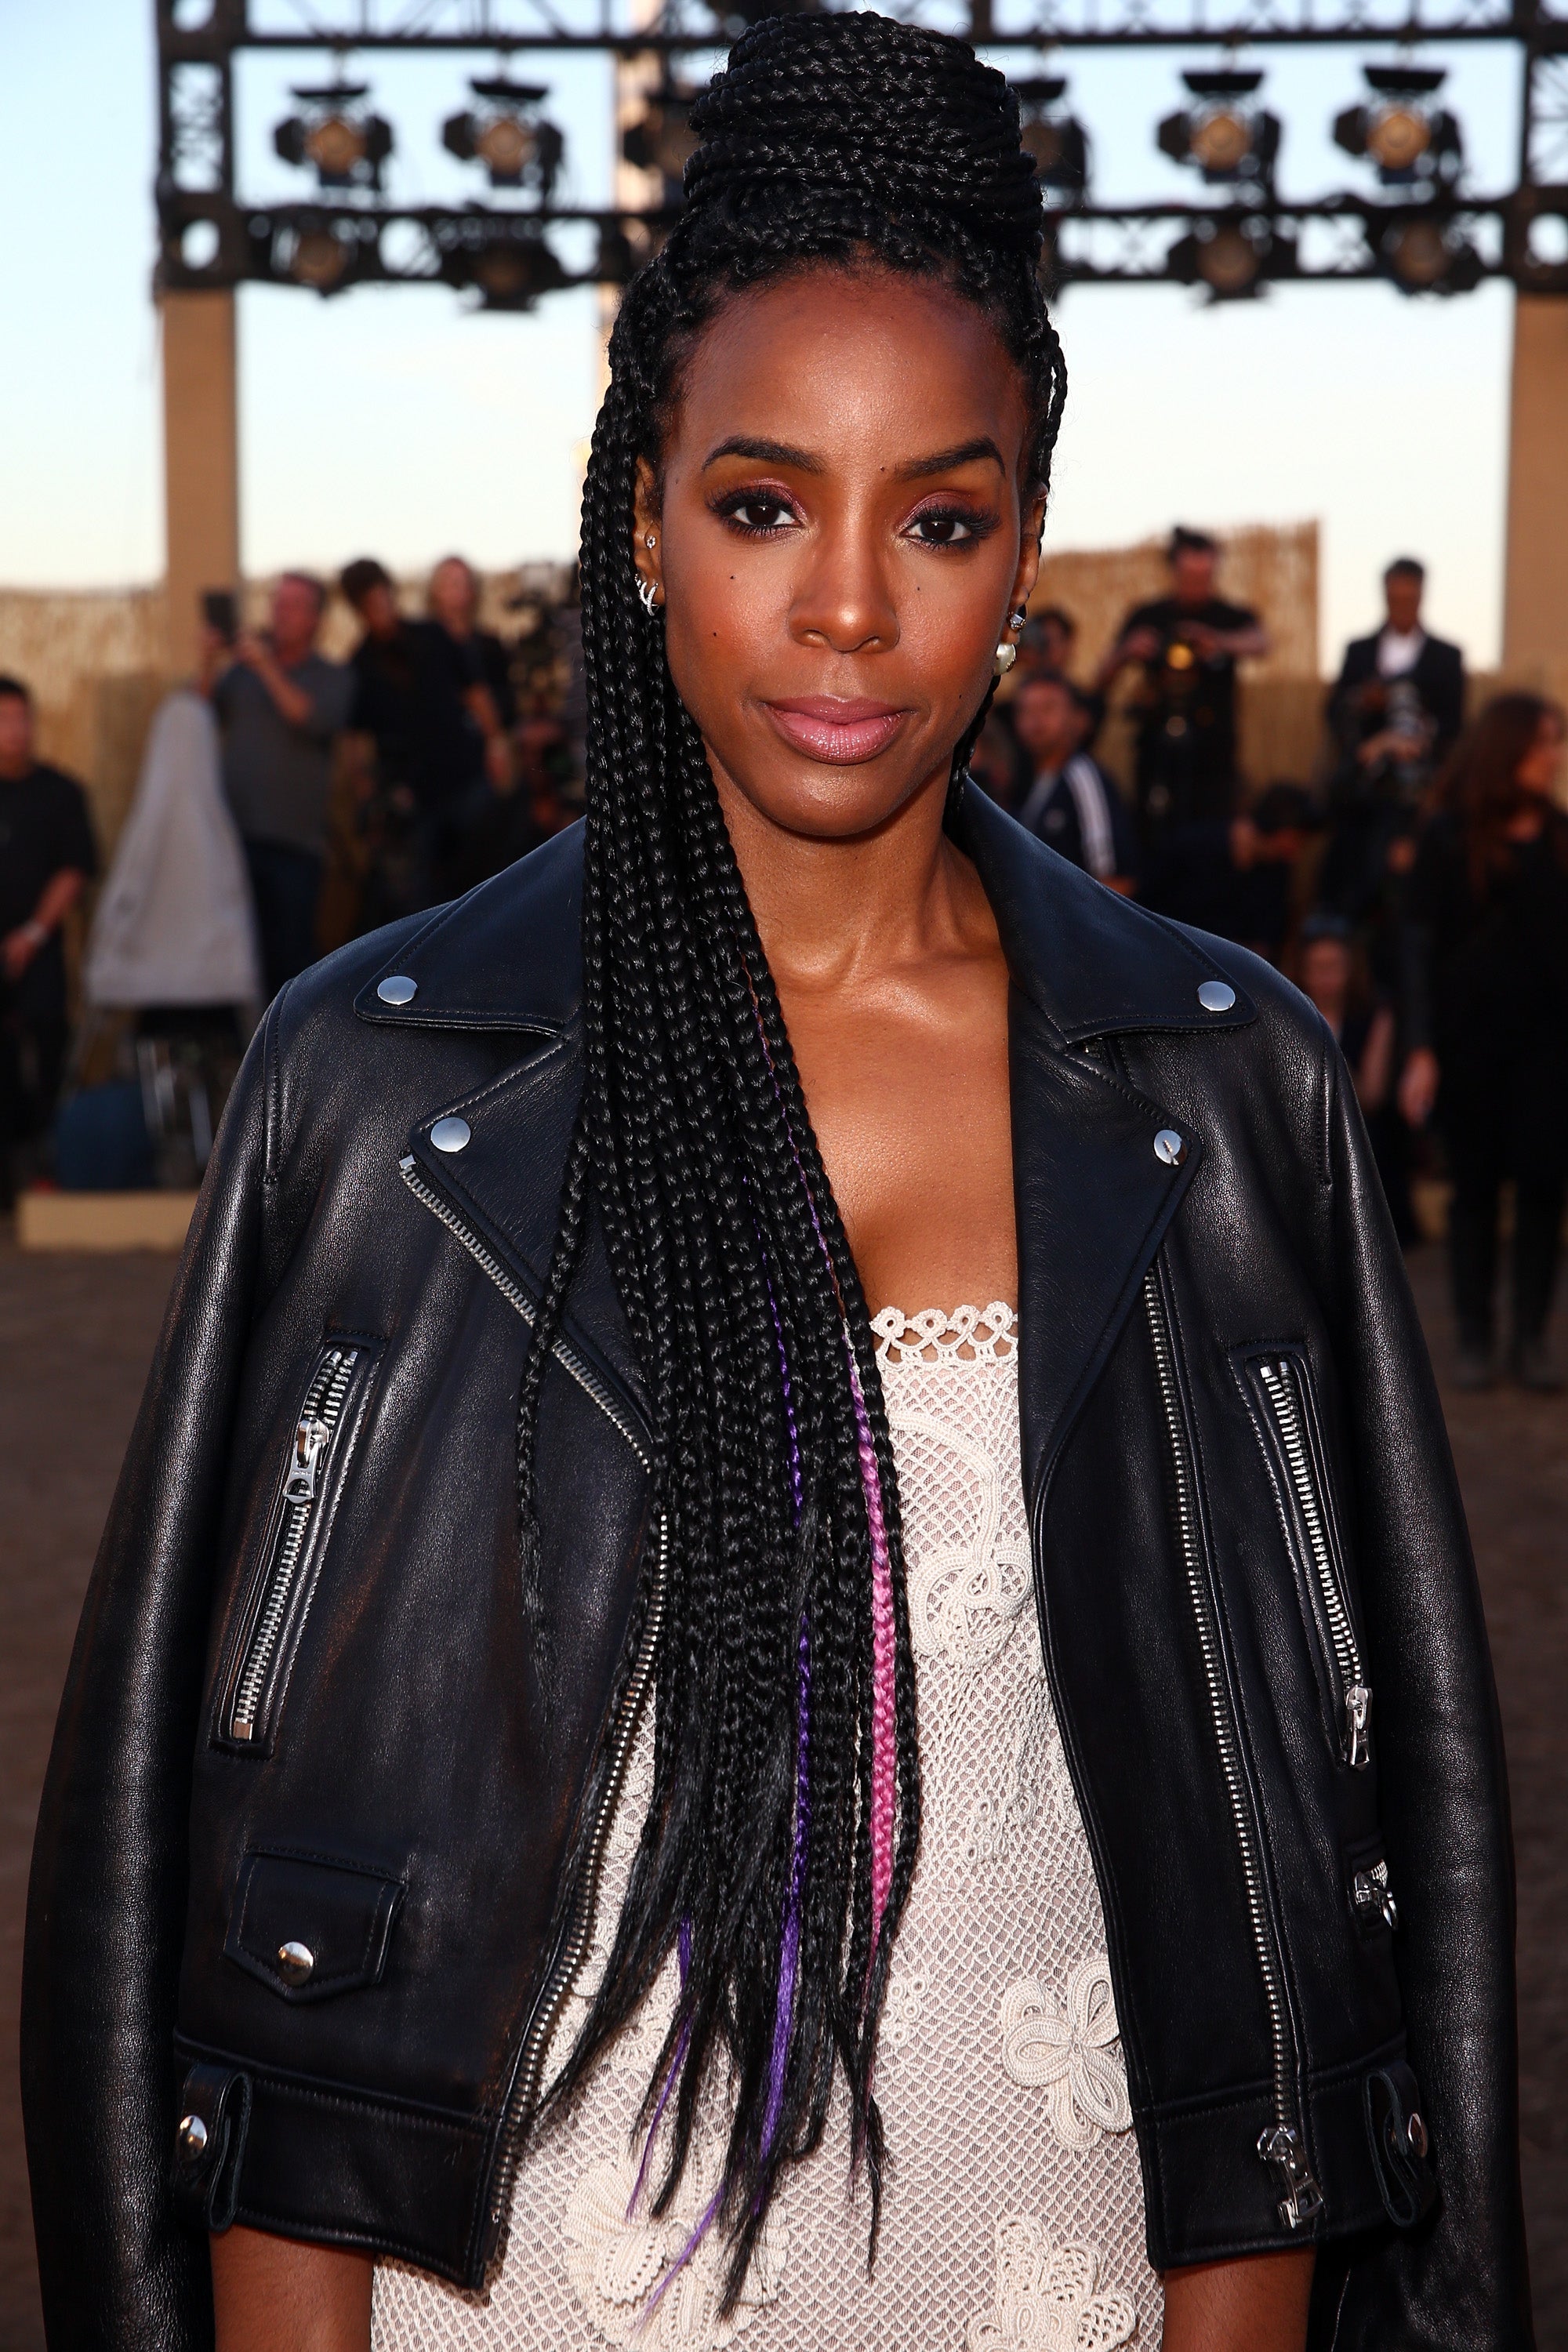 You'll Never Guess Who Convinced Kelly Rowland To Rock Her Iconic Pixie
